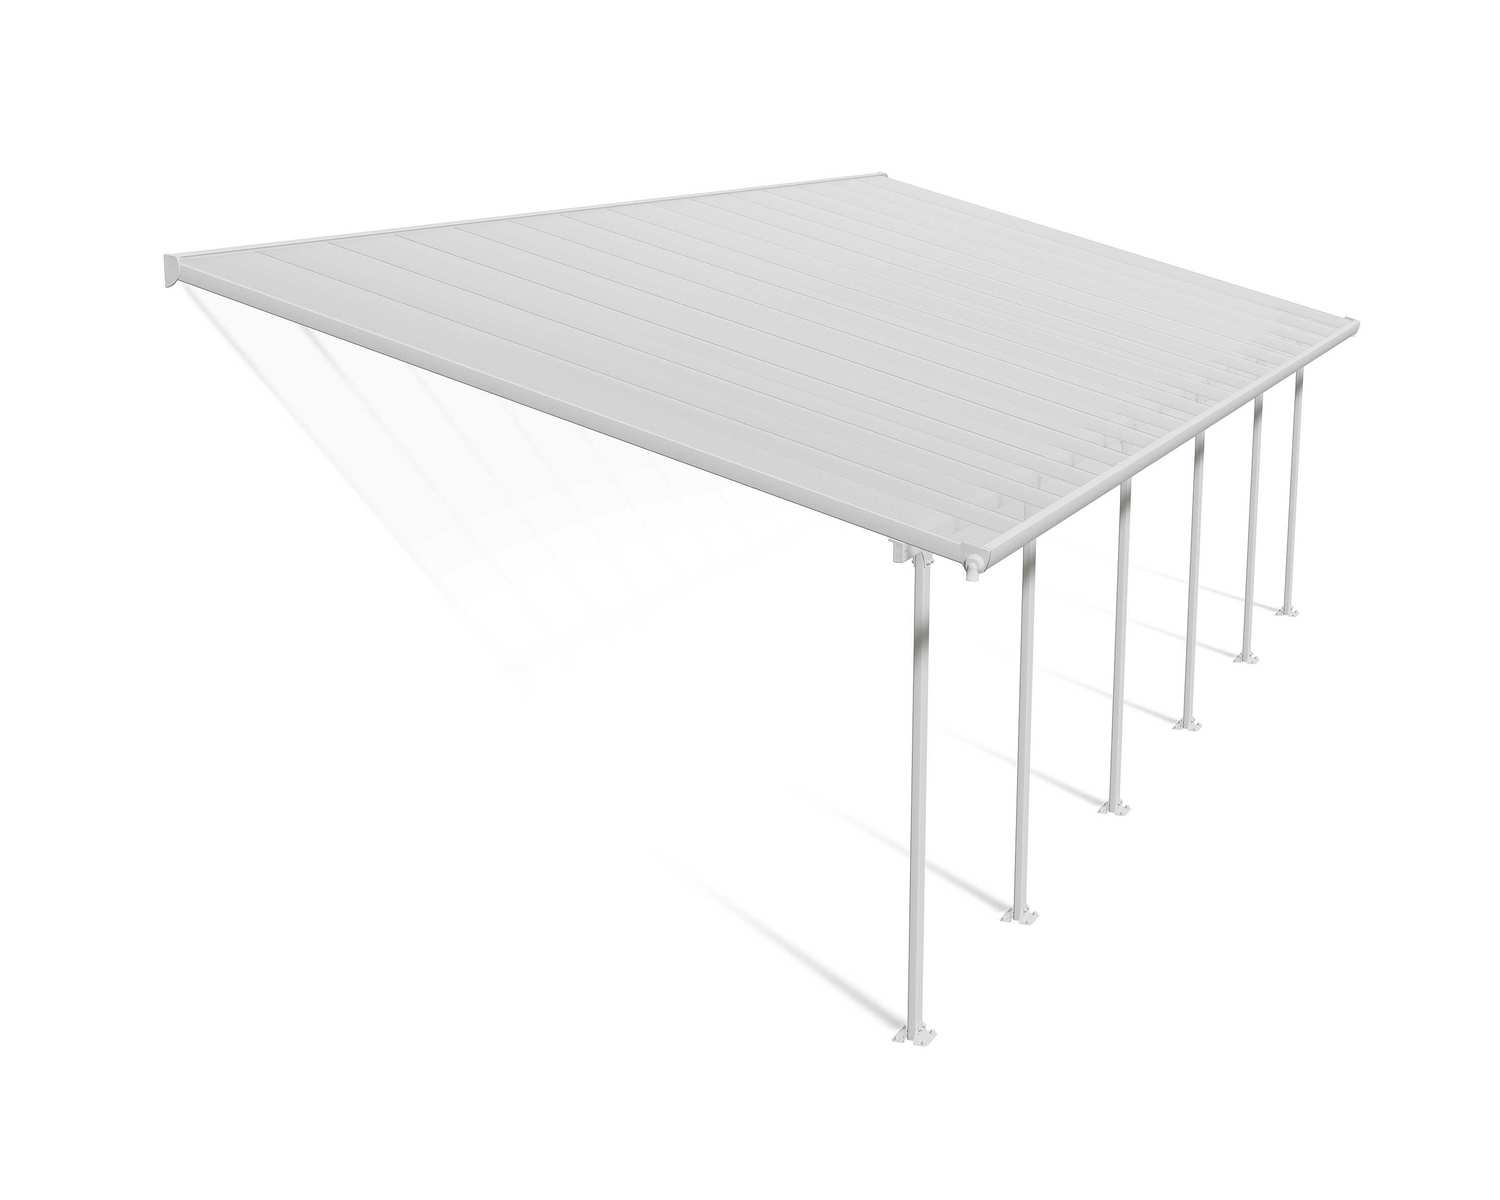 Patio Cover Kit Feria 4 ft. x 10.31 ft. White Structure & Clear Multi Wall Glazing